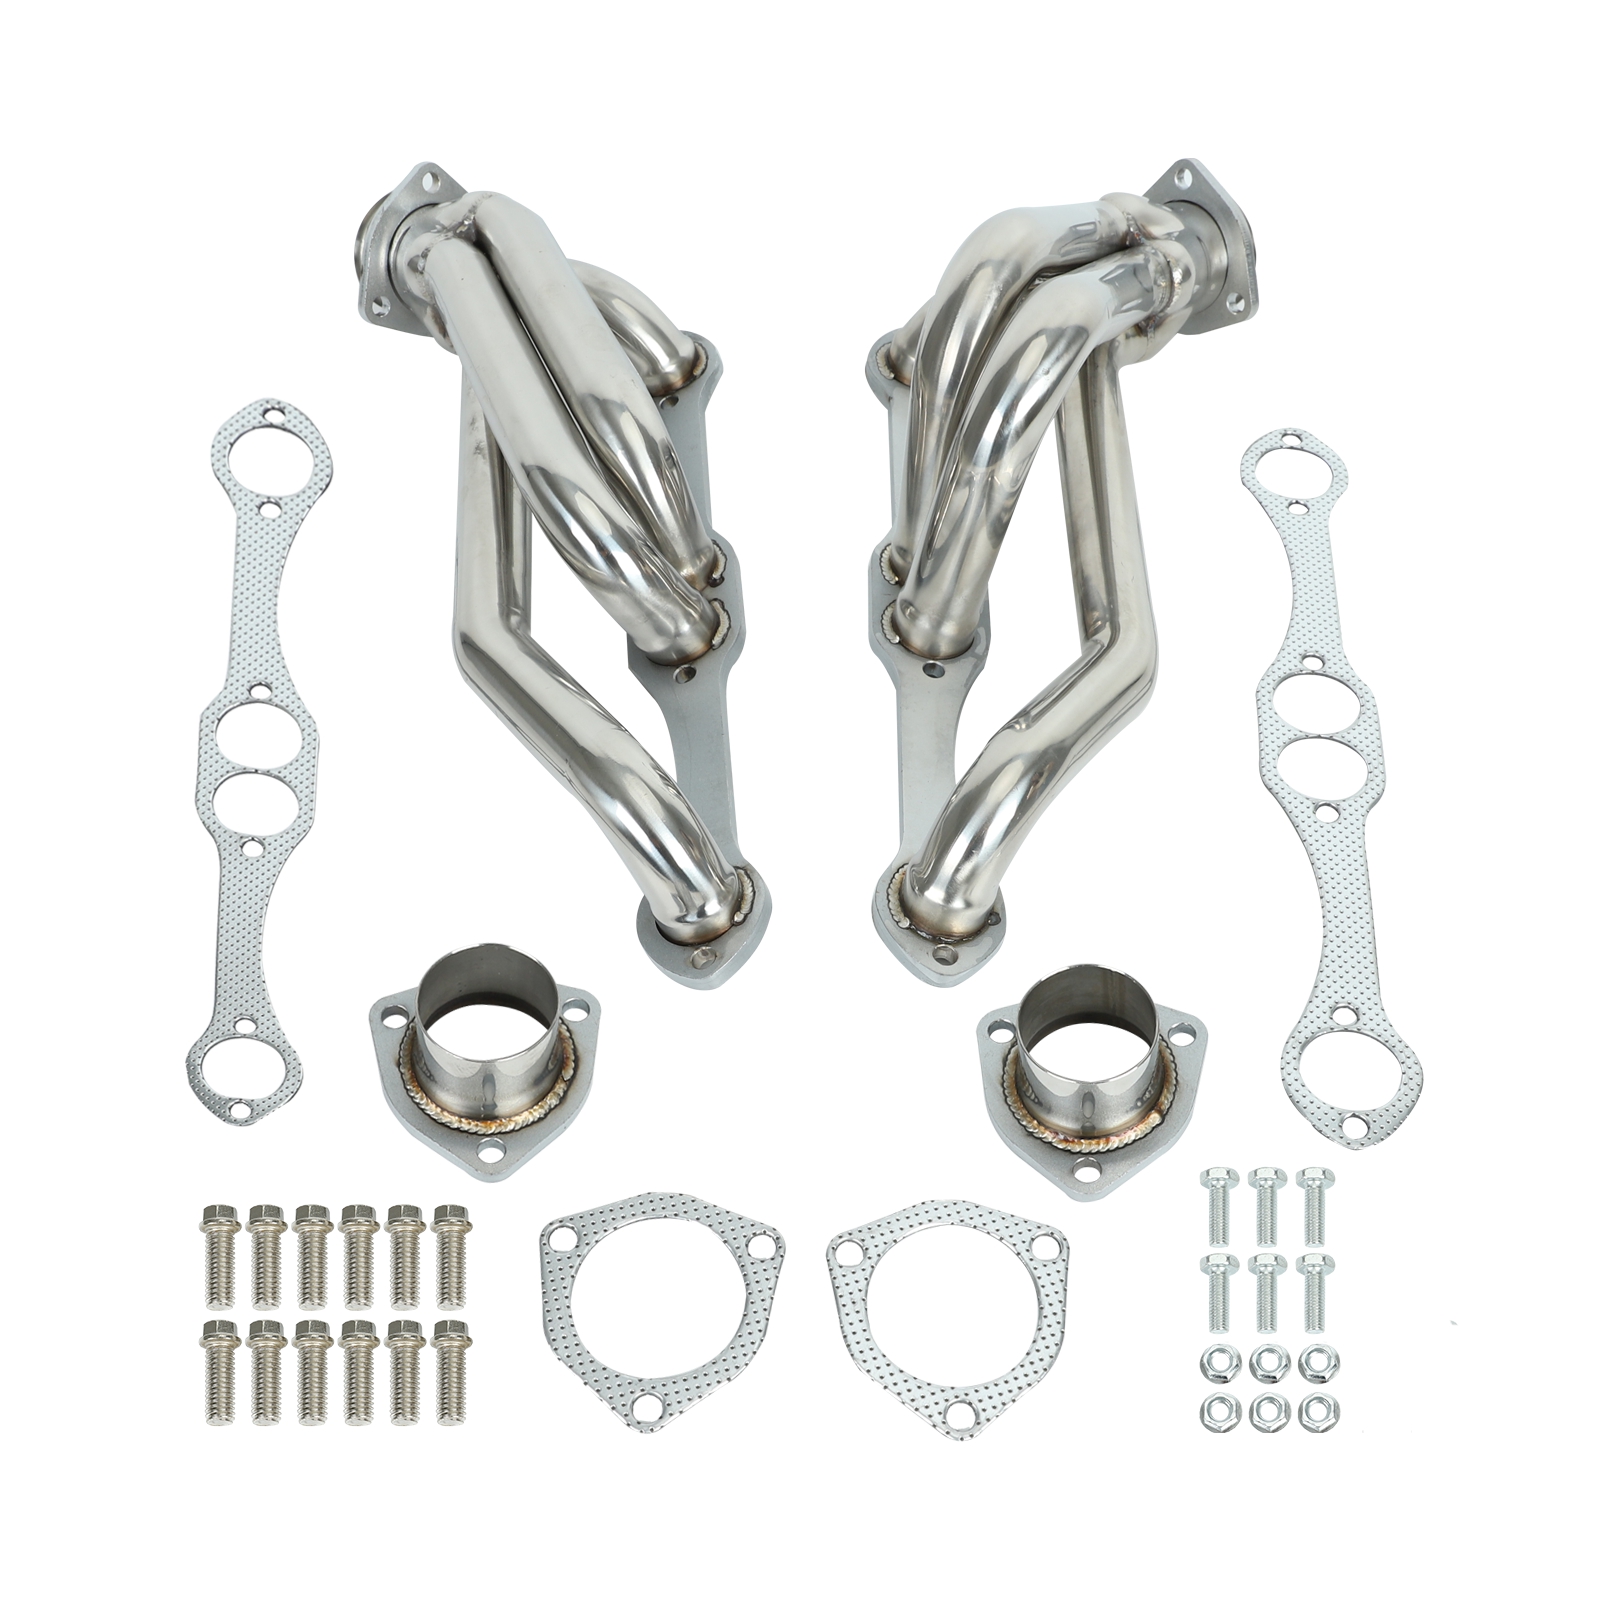 Engine Swap Headers for Small Block Chevrolet Chevy Blazer S10 2WD 350 V8